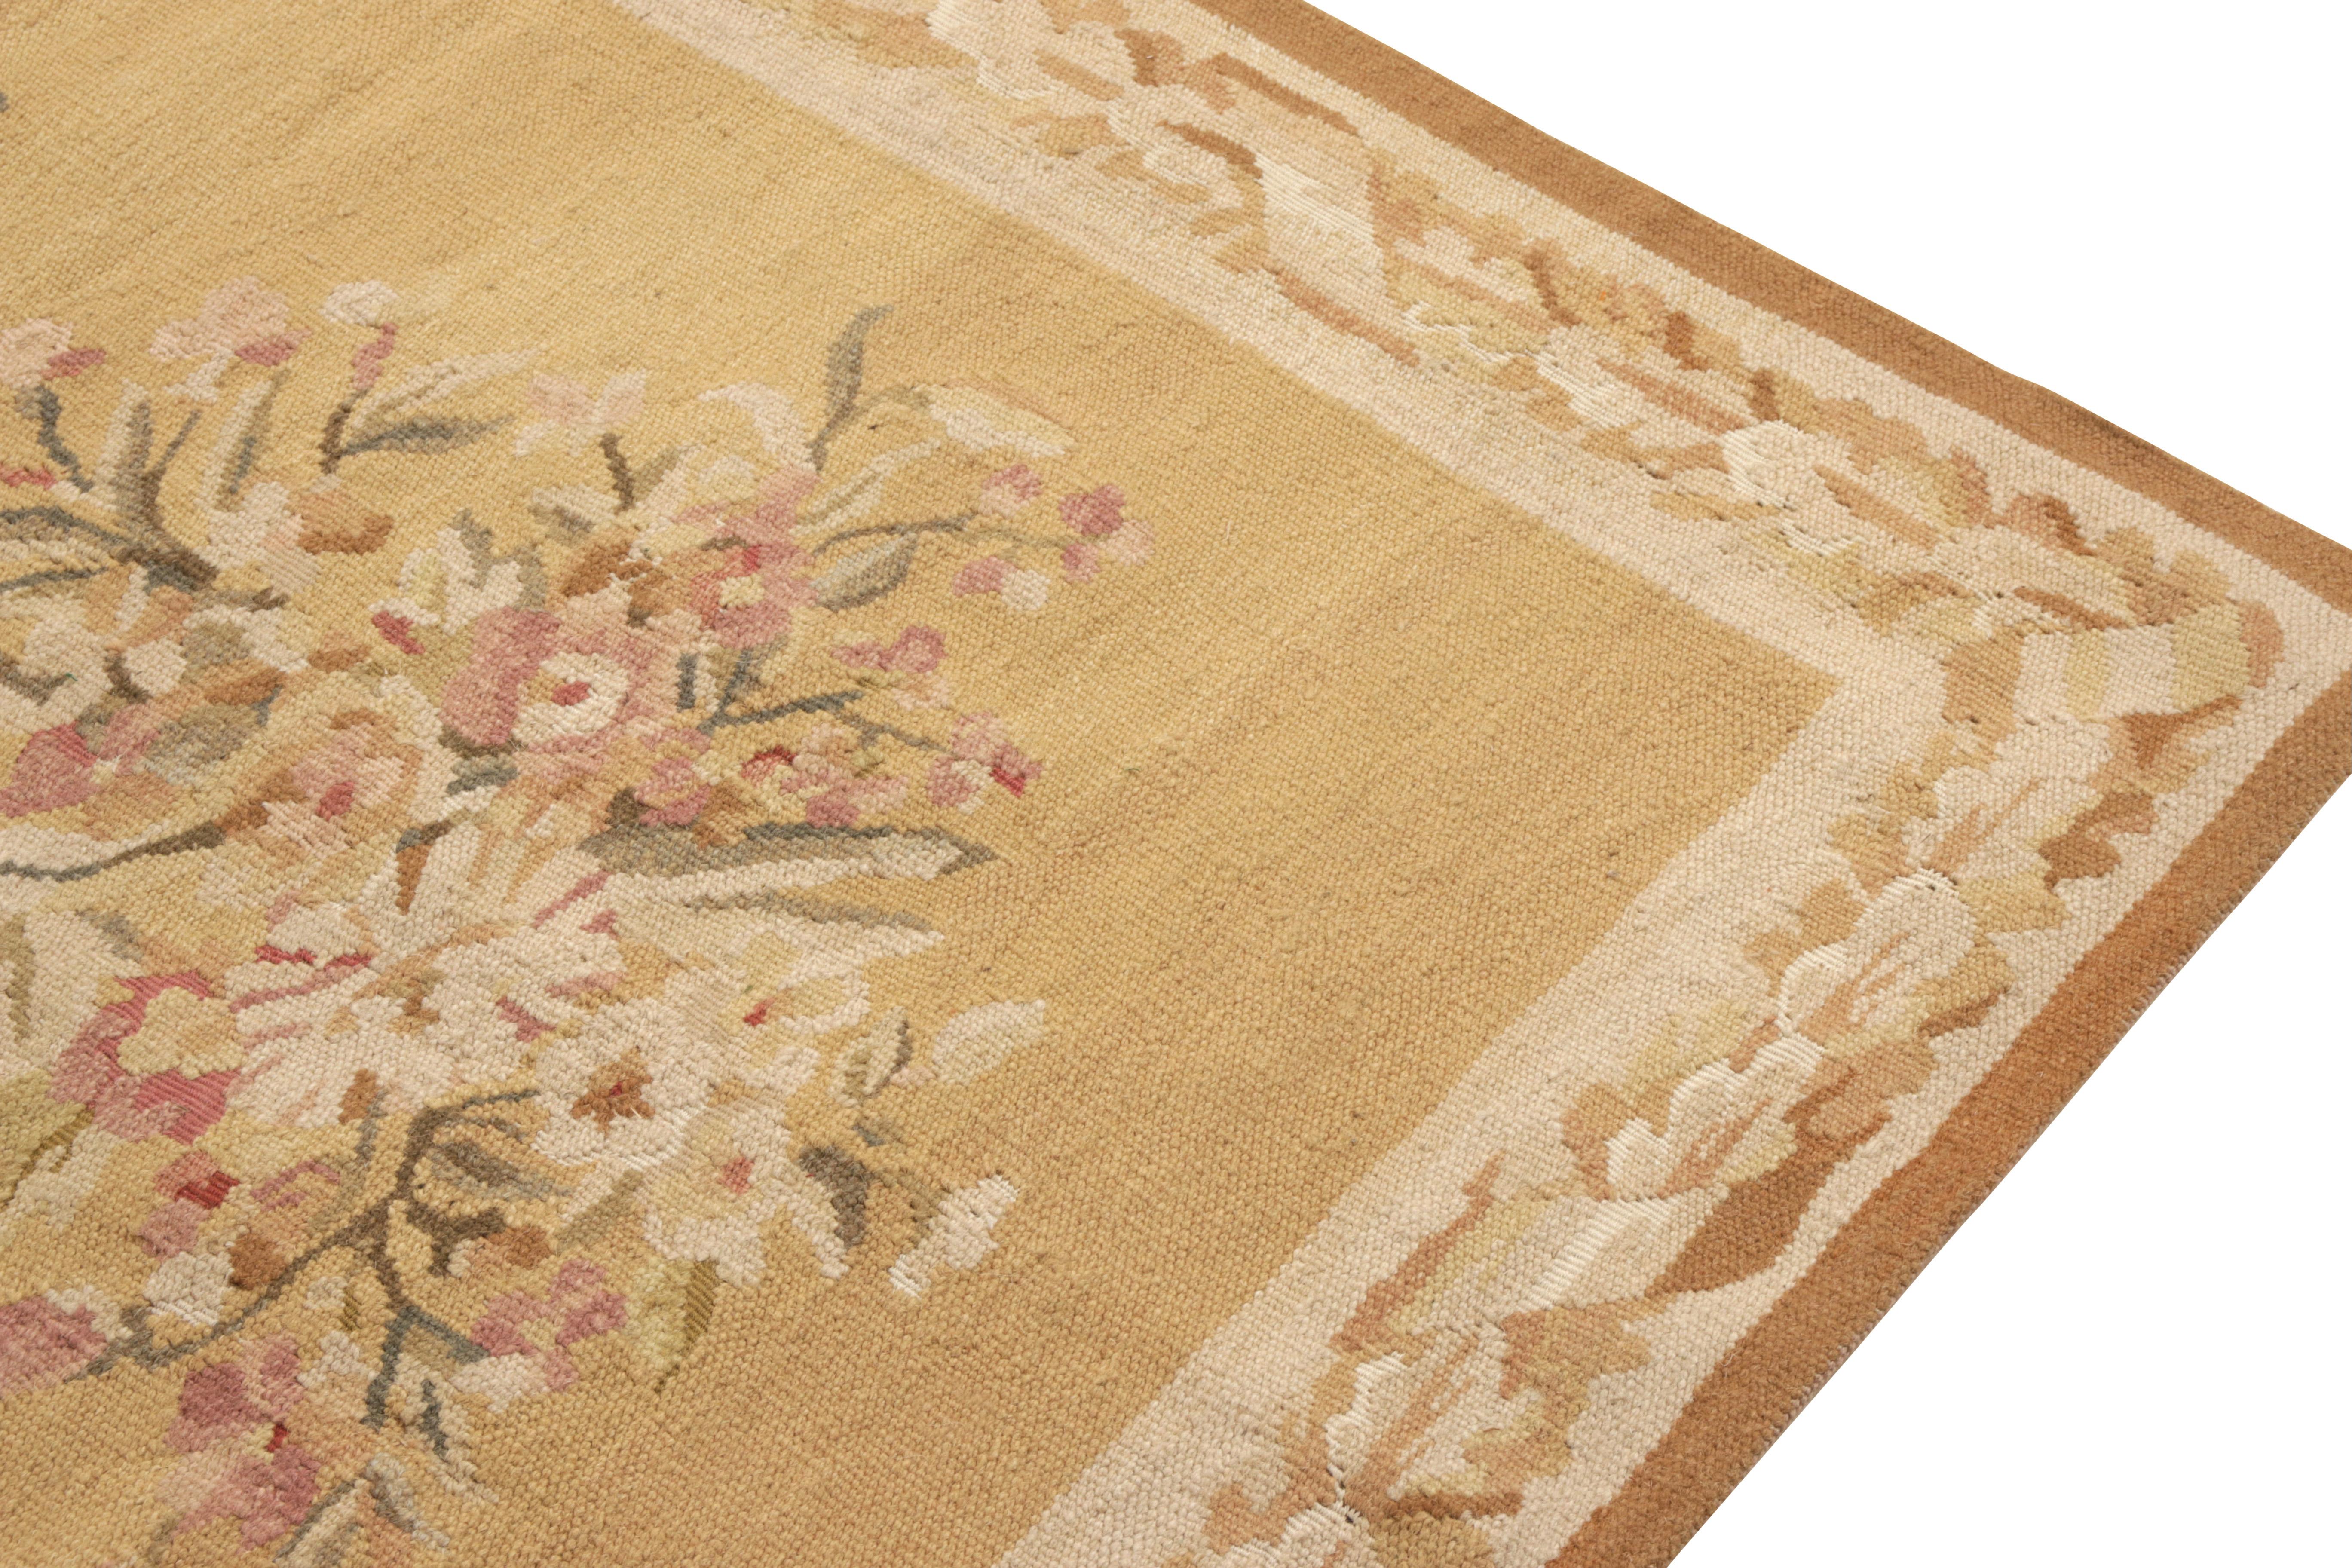 Hand-Knotted Rug & Kilim’s Aubusson Style Flat Weave in Beige, Cream Medallion Floral Pattern For Sale